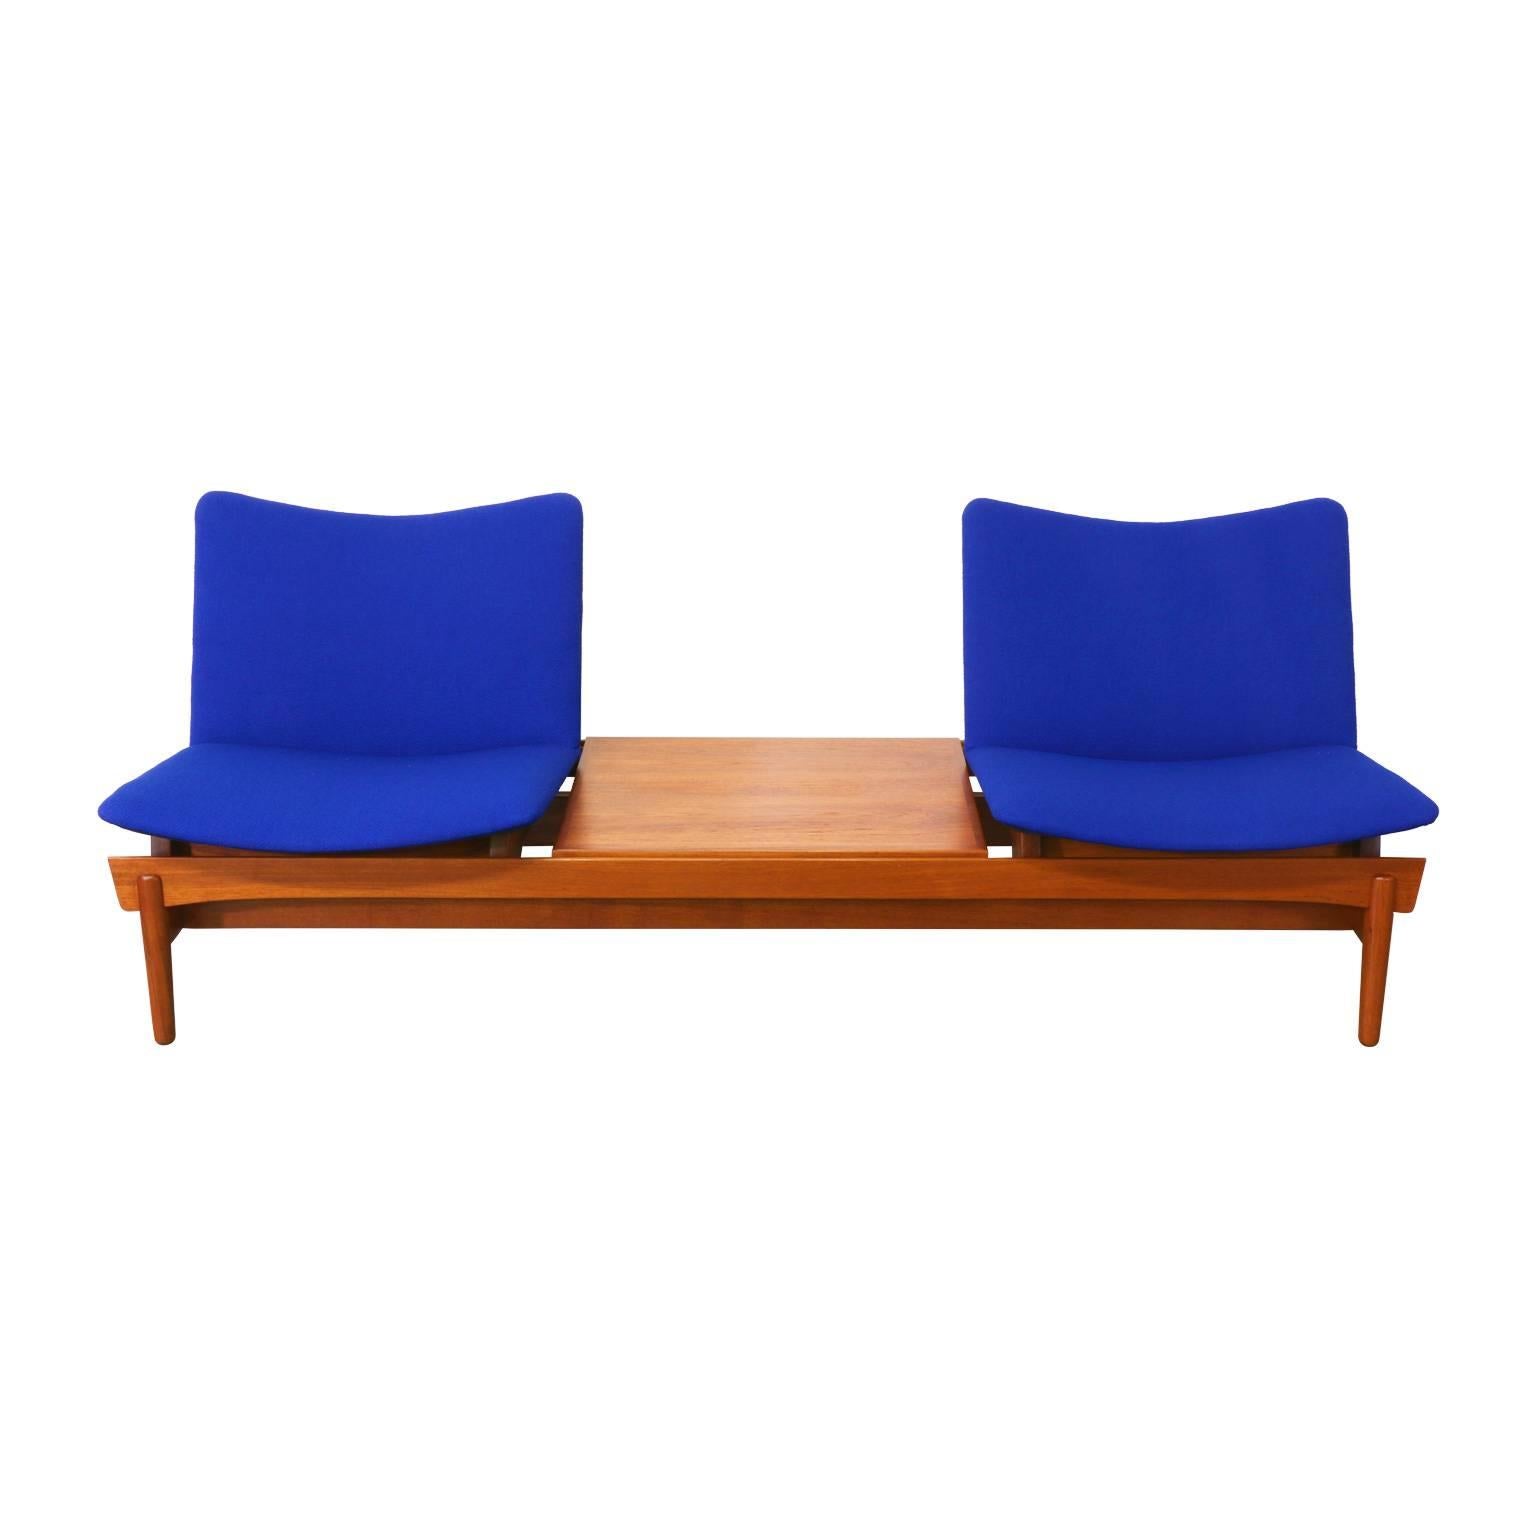 Designer: Hans Olsen.
Manufacturer: Bramin.
Period/Style: Danish modern.
Country: Denmark.
Date: 1950s.

Dimensions: 28″ H x 67″ L x 30″ W.
Materials: Teak, tweed fabric.
Condition: Excellent, newly refinished and reupholstered.
Number of